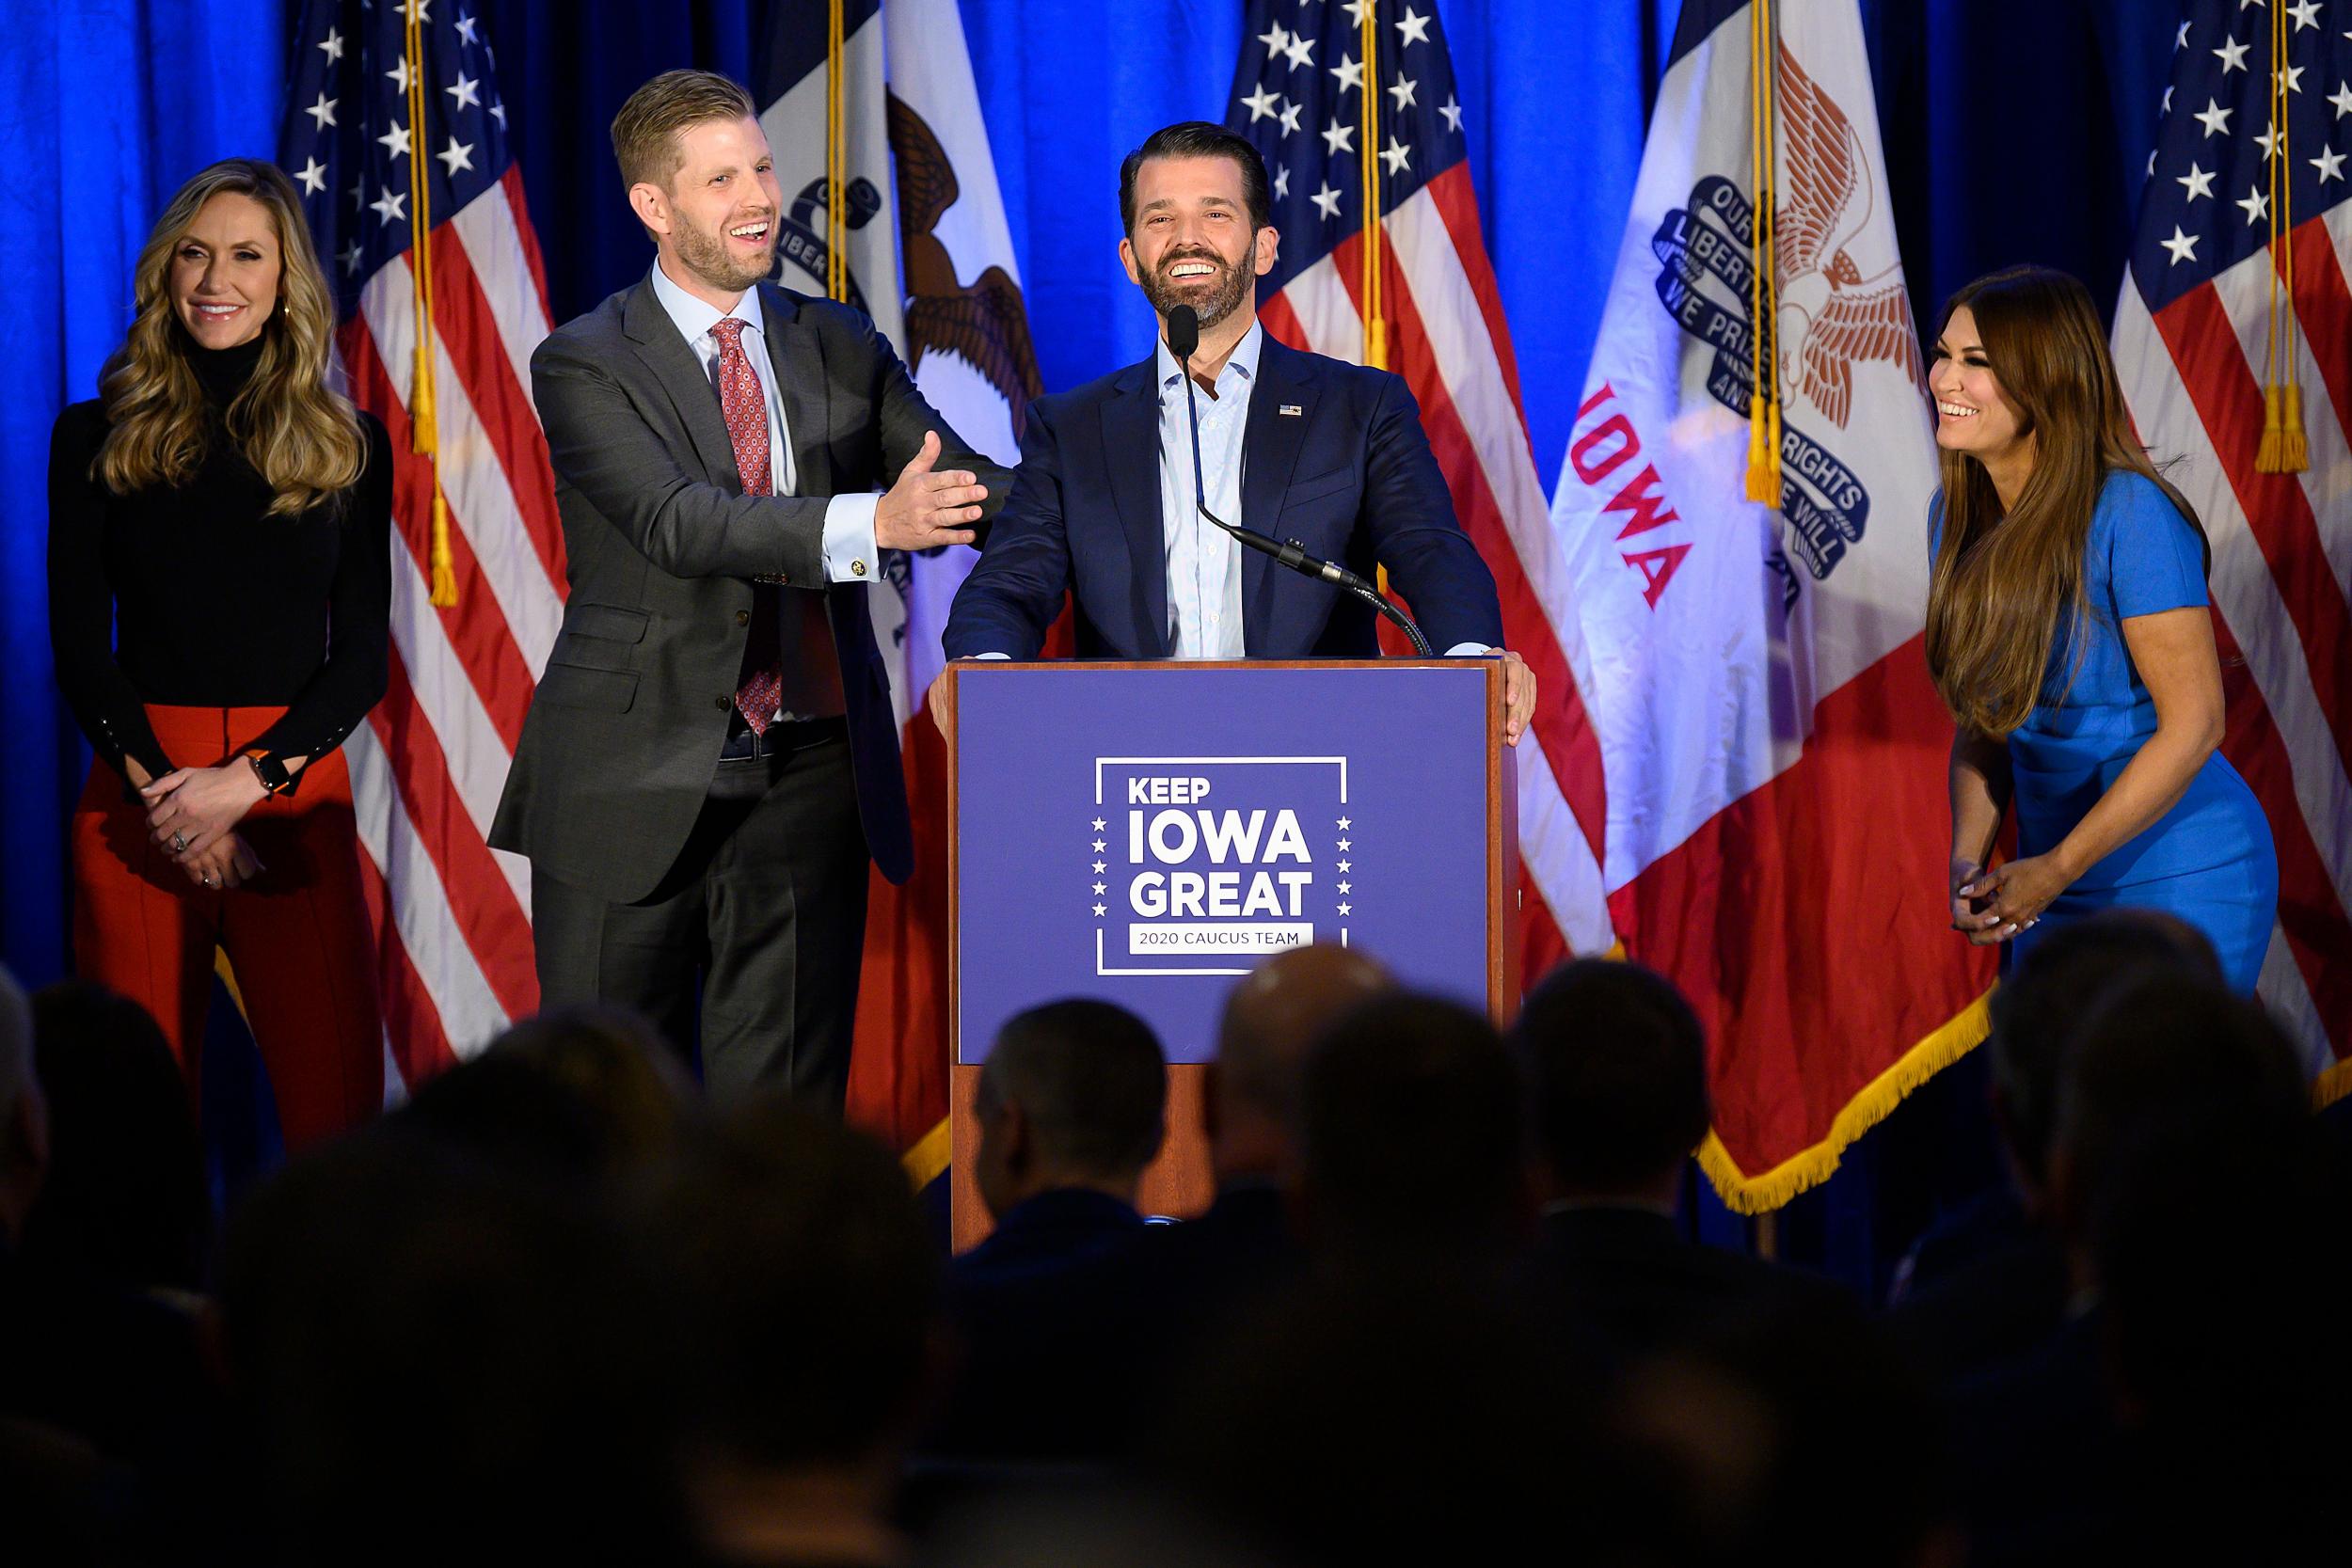 Donald Trump Jr speaks with his brother Eric and wife Lara, as well as his girlfriend Kimberly Guilfoyle during a "Keep Iowa Great" press conference in Des Moines on February 3, 2020